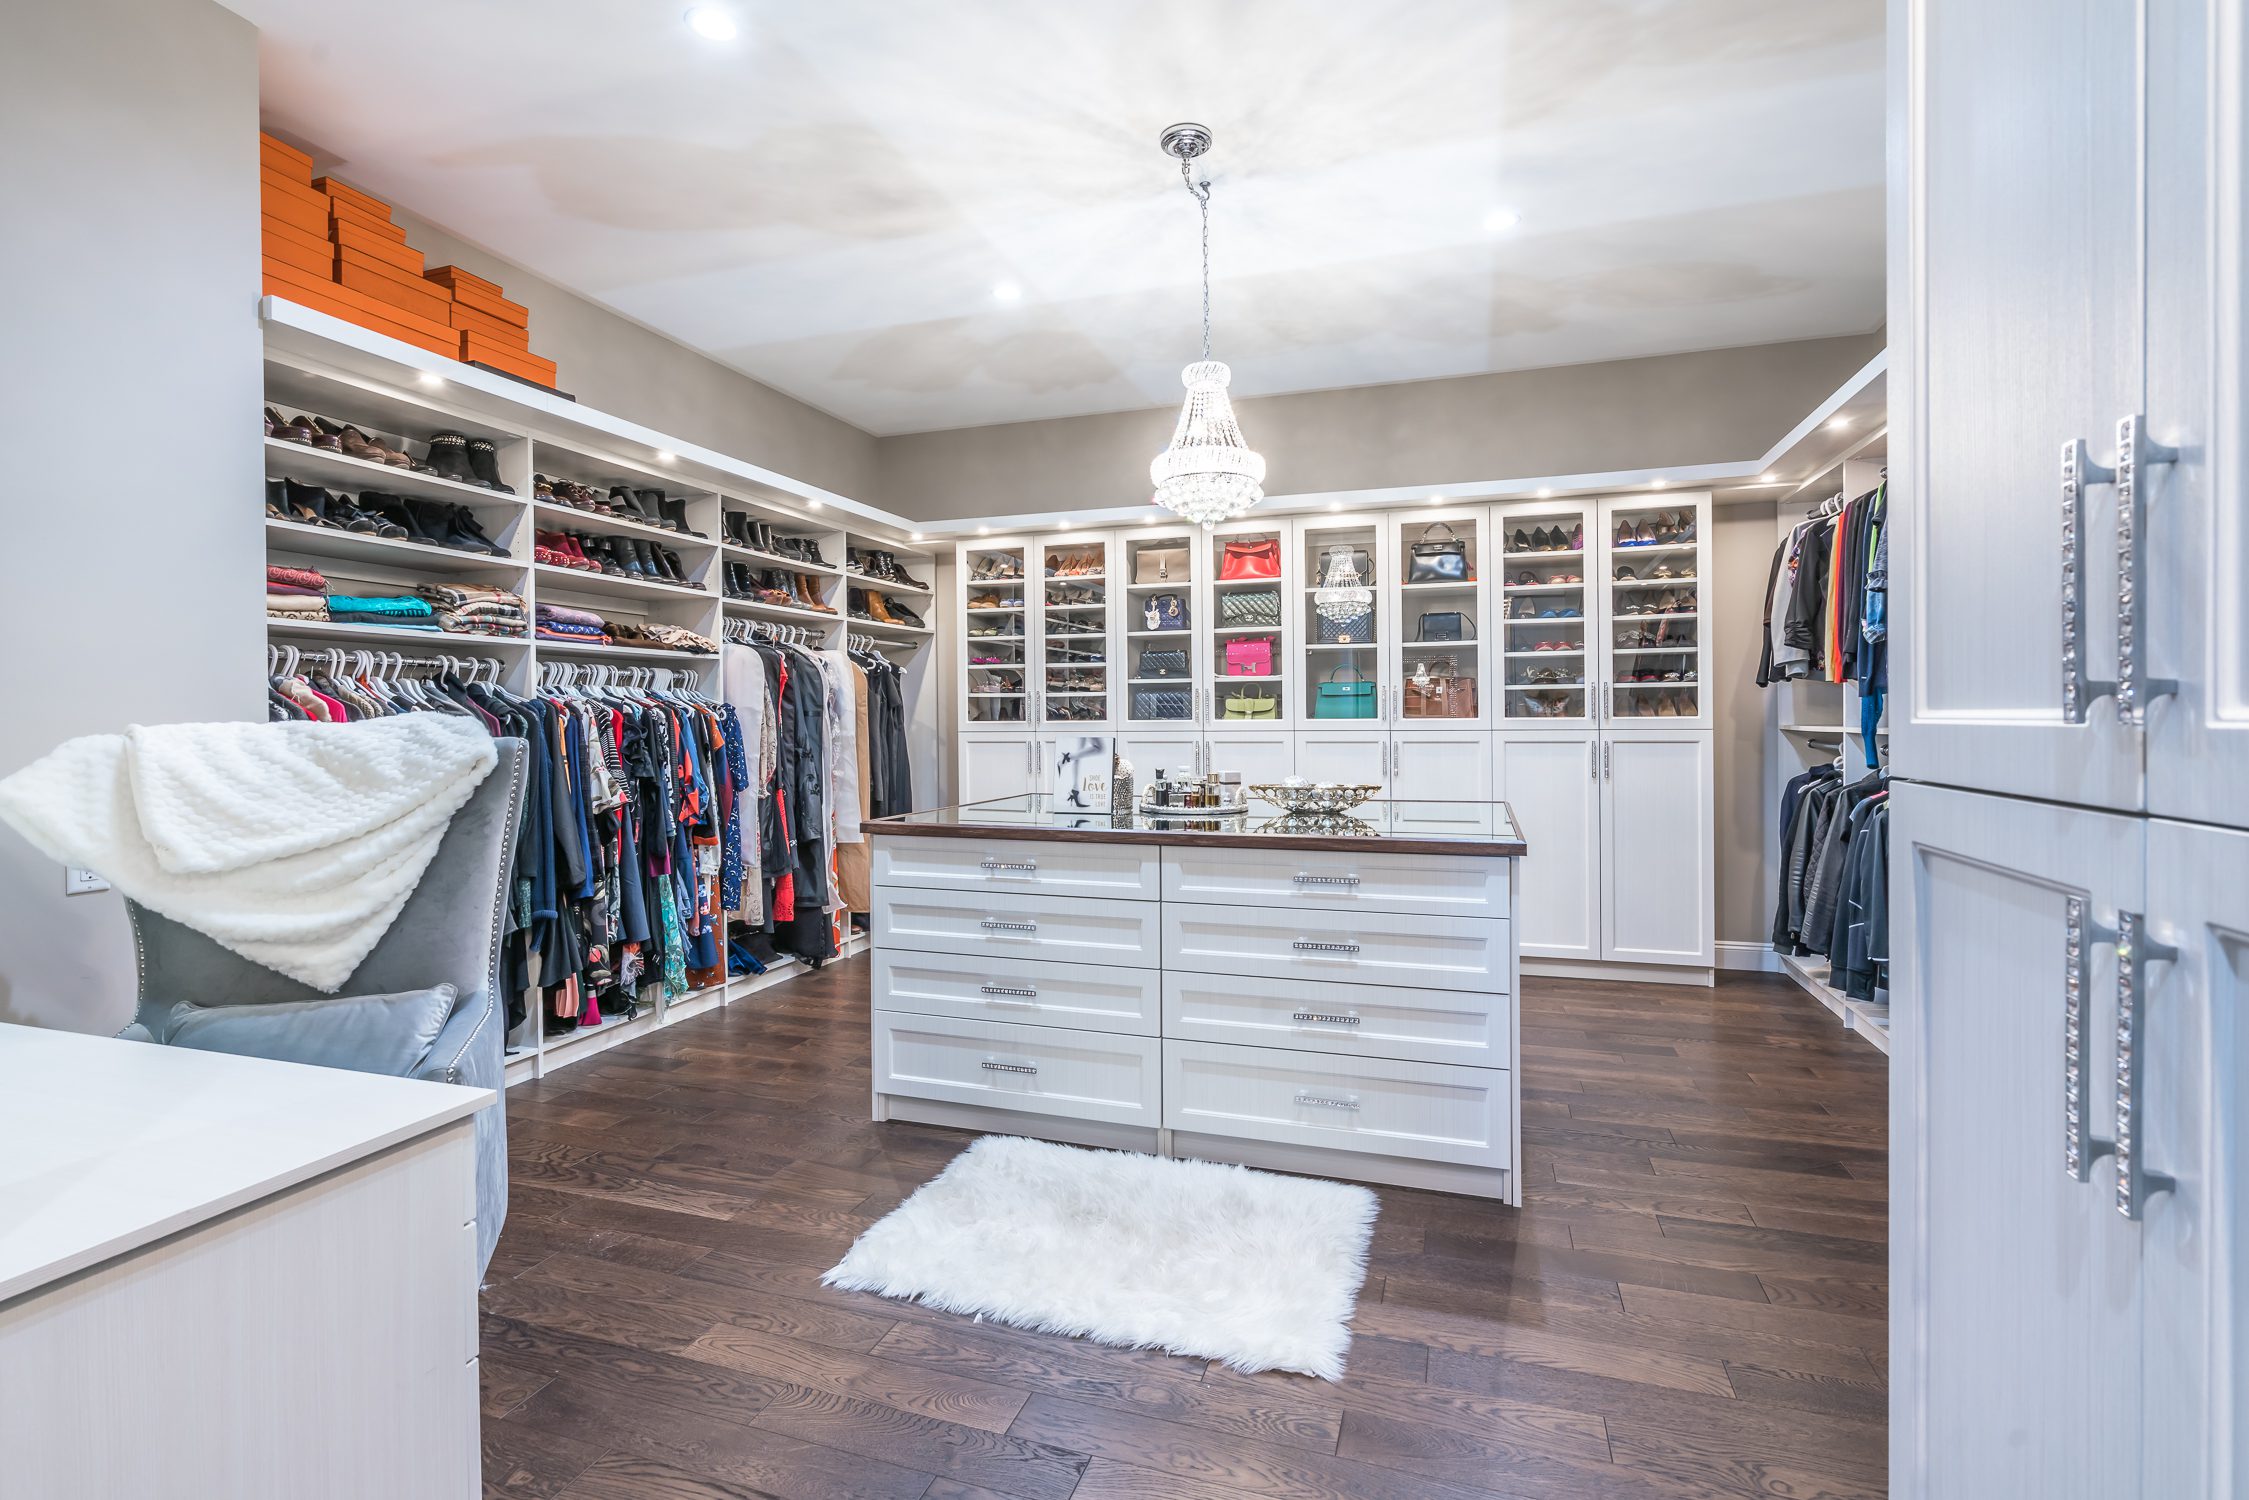 Spacious, luxurious walk-in closet with an island in the center